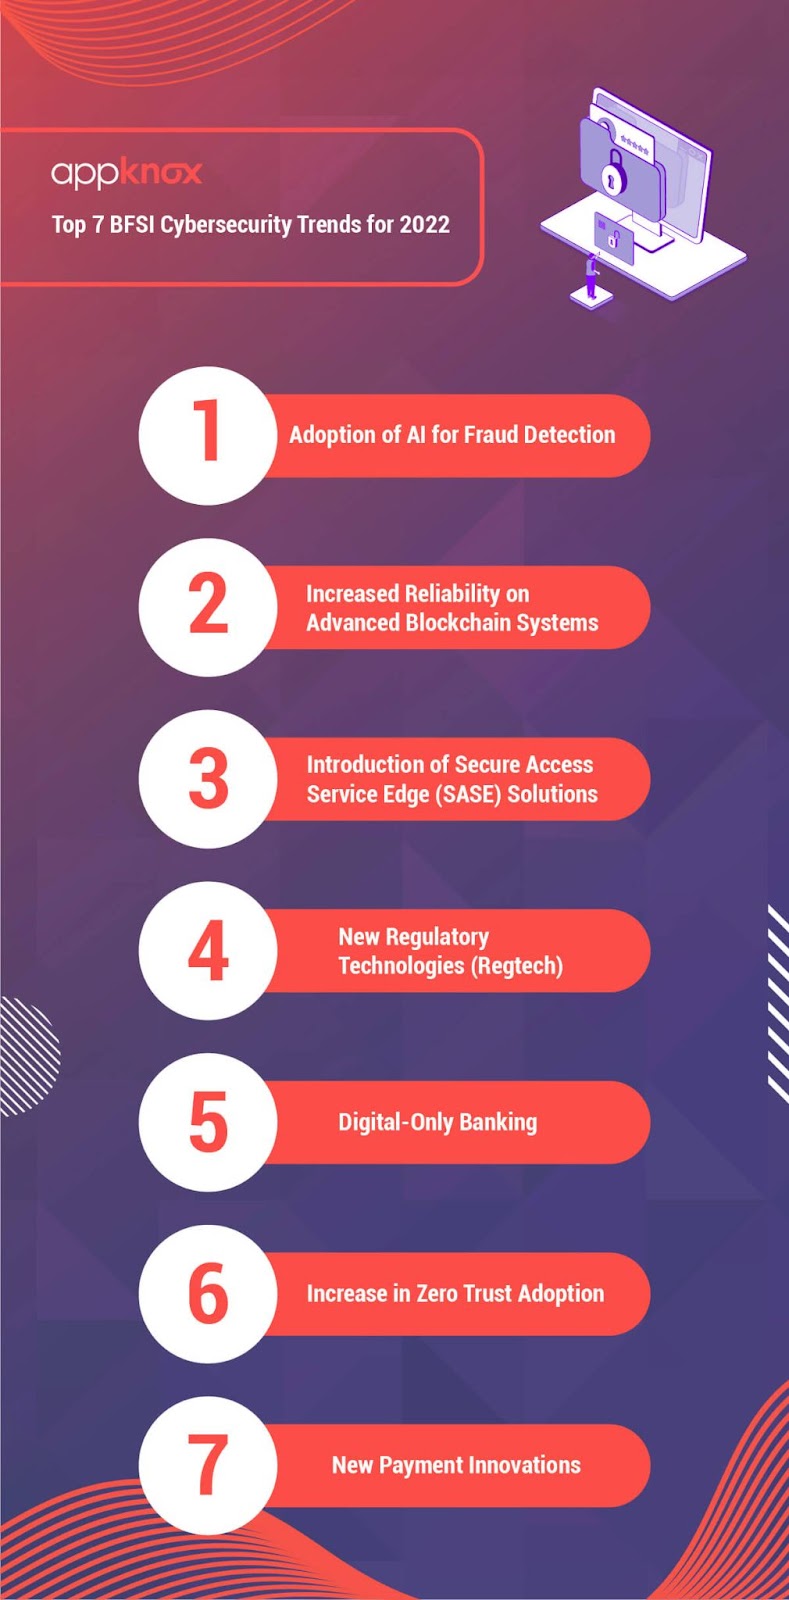 Top 7 BFSI Cybersecurity Trends for 2022